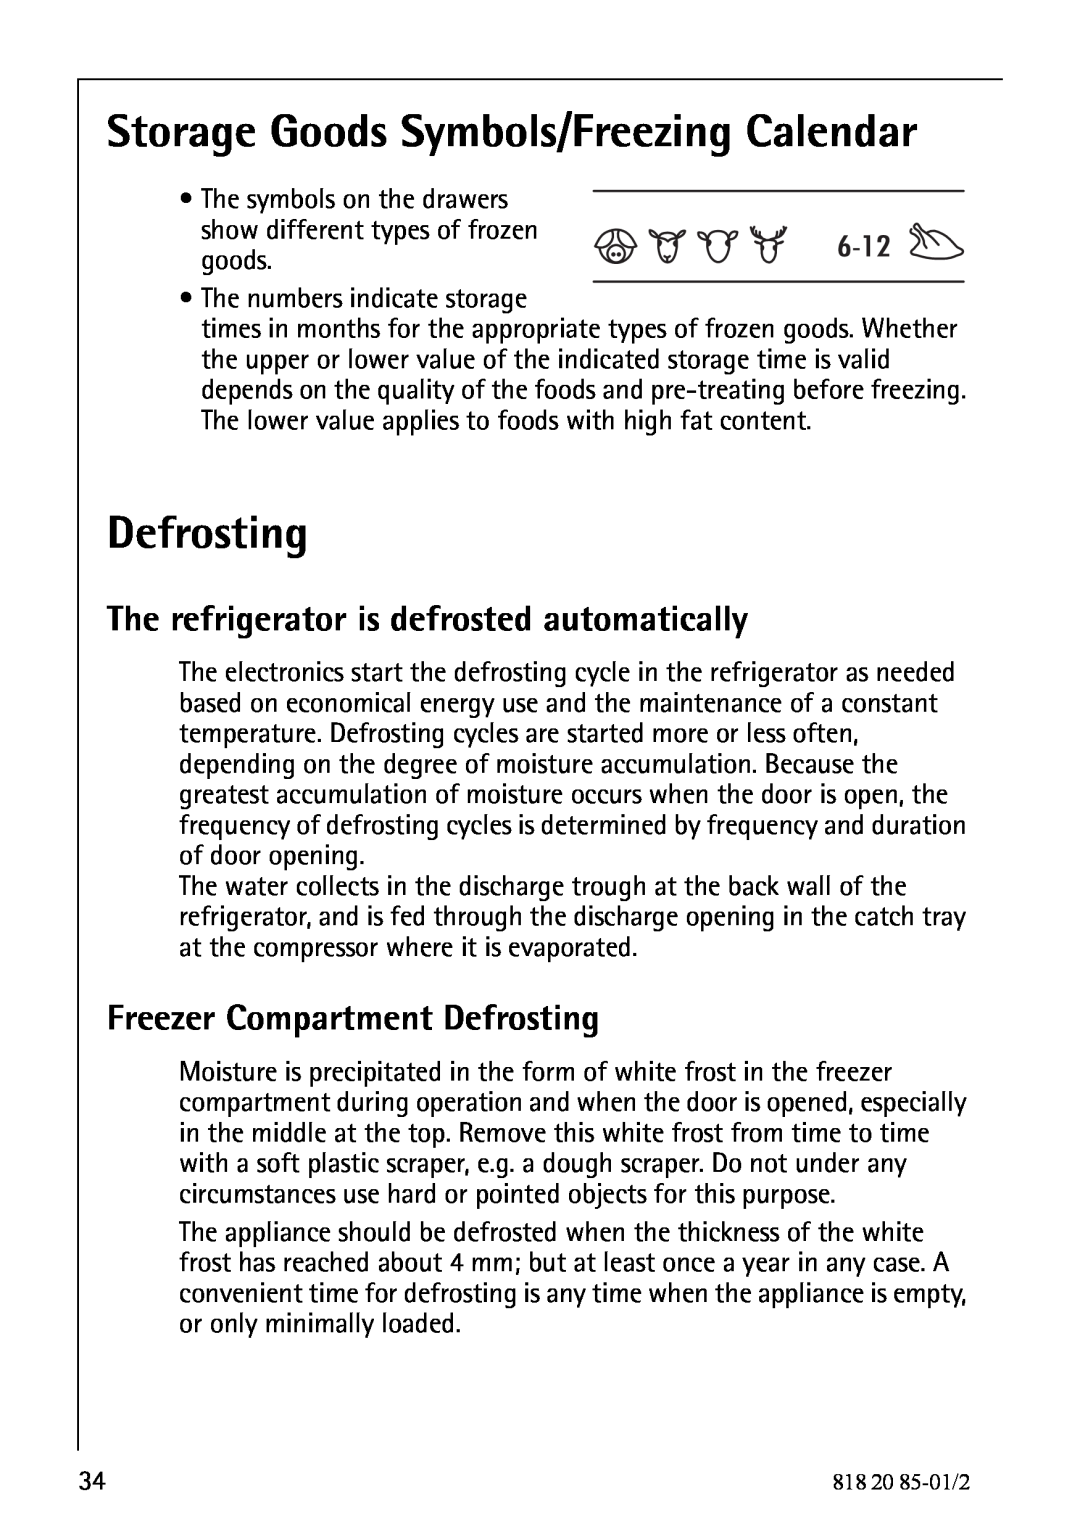 Electrolux 818 20 85 Storage Goods Symbols/Freezing Calendar, Defrosting, The refrigerator is defrosted automatically 